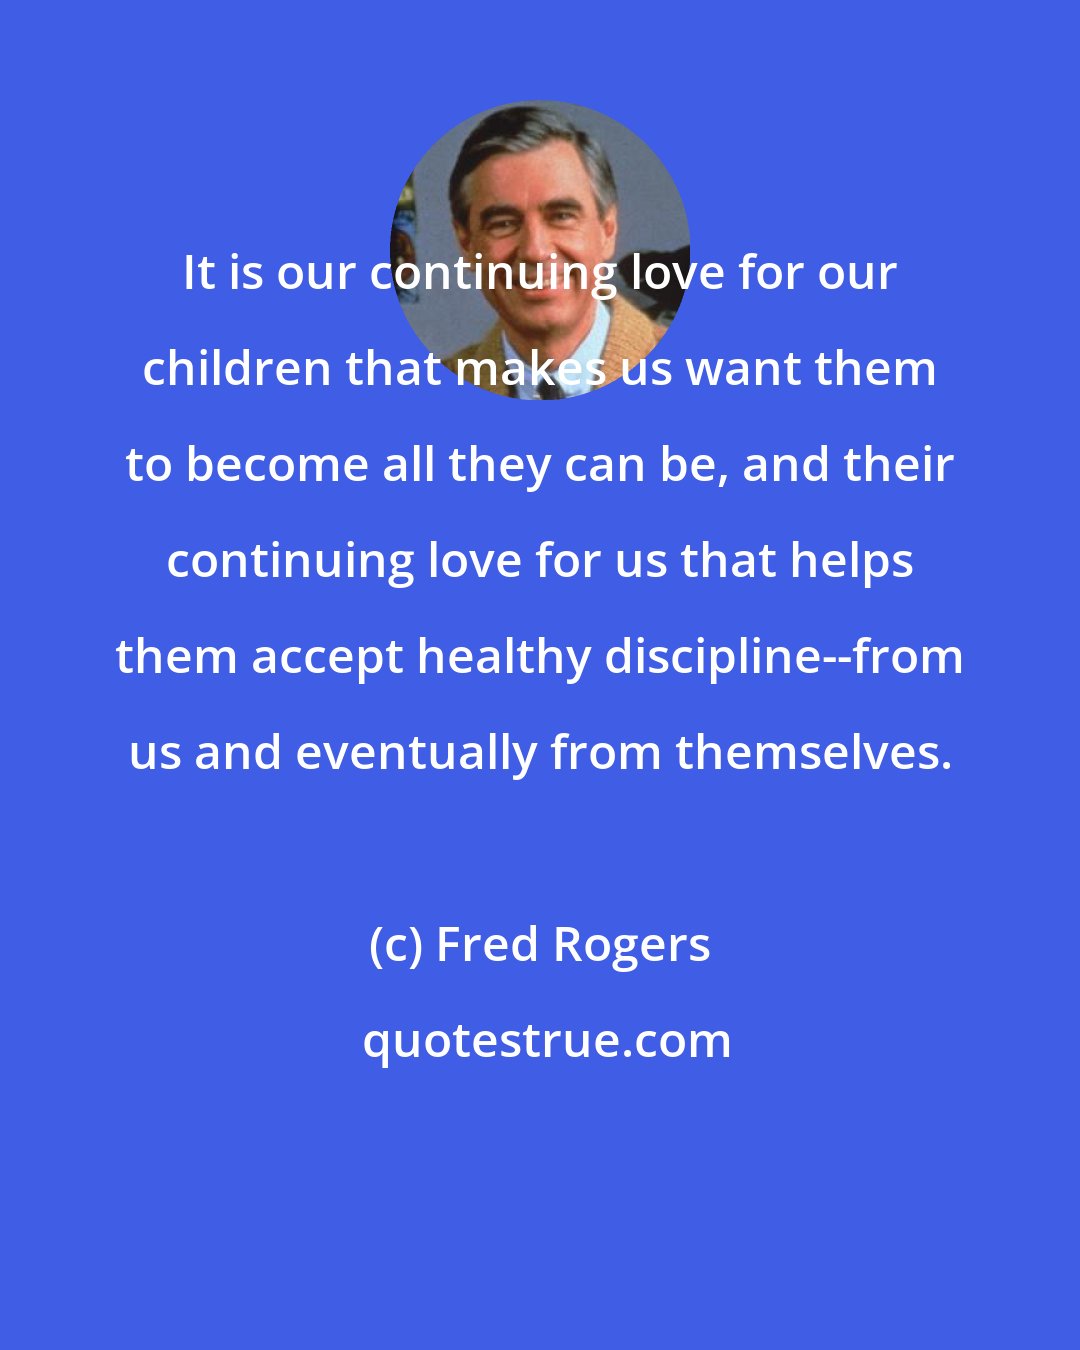 Fred Rogers: It is our continuing love for our children that makes us want them to become all they can be, and their continuing love for us that helps them accept healthy discipline--from us and eventually from themselves.